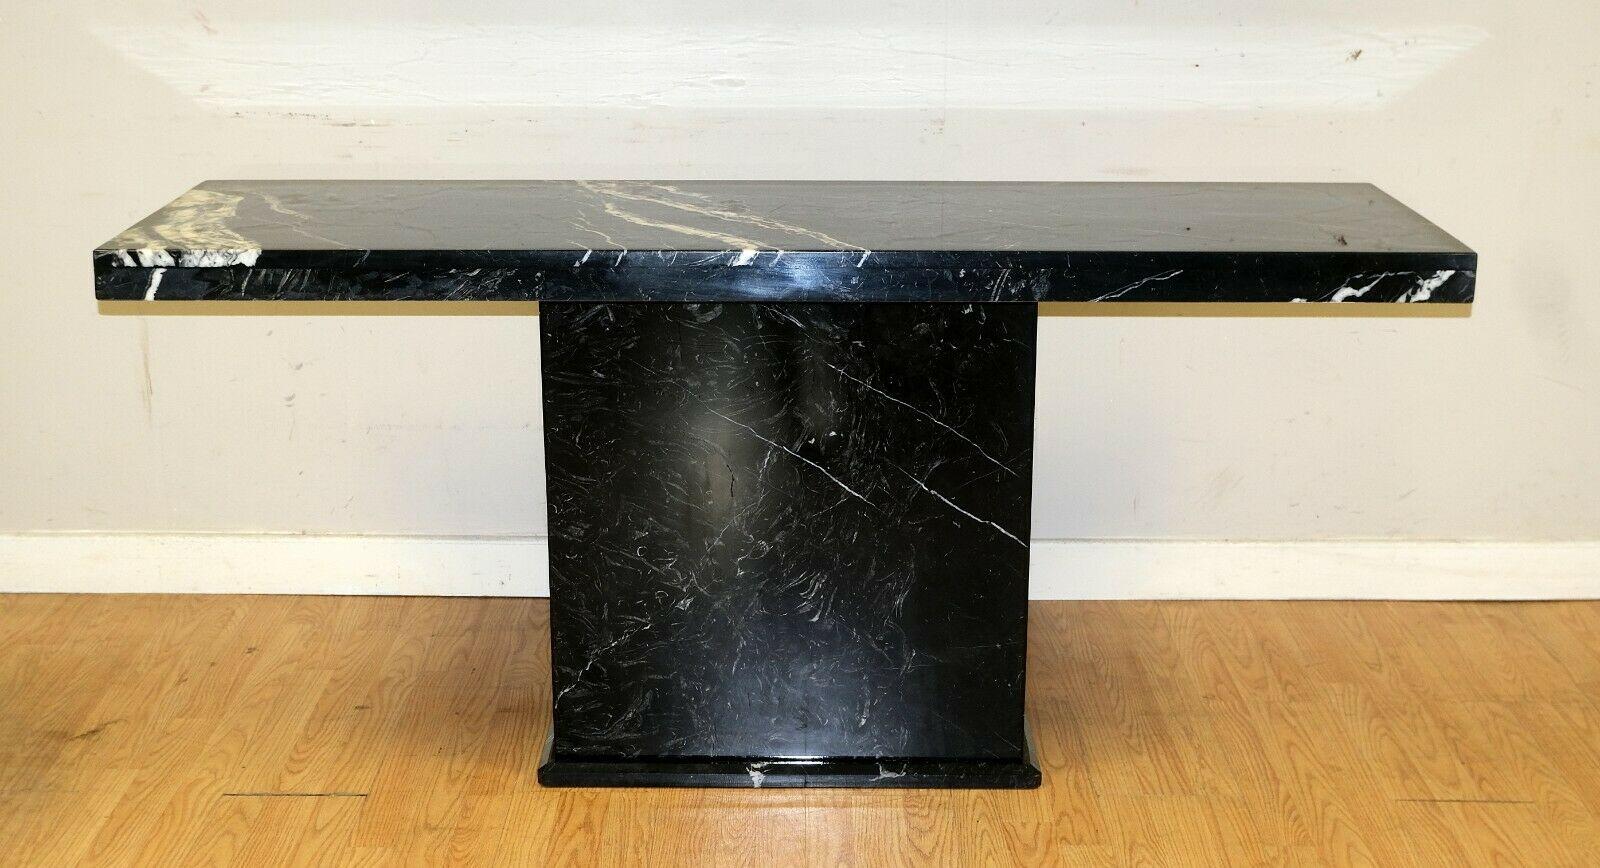 We are delighted to offer for sale this stunning Marquina marble black and white console table.

This exquisite console table will add style and glamour, creating a beautiful focal point to your home. The sublime appearance can be used as a stage